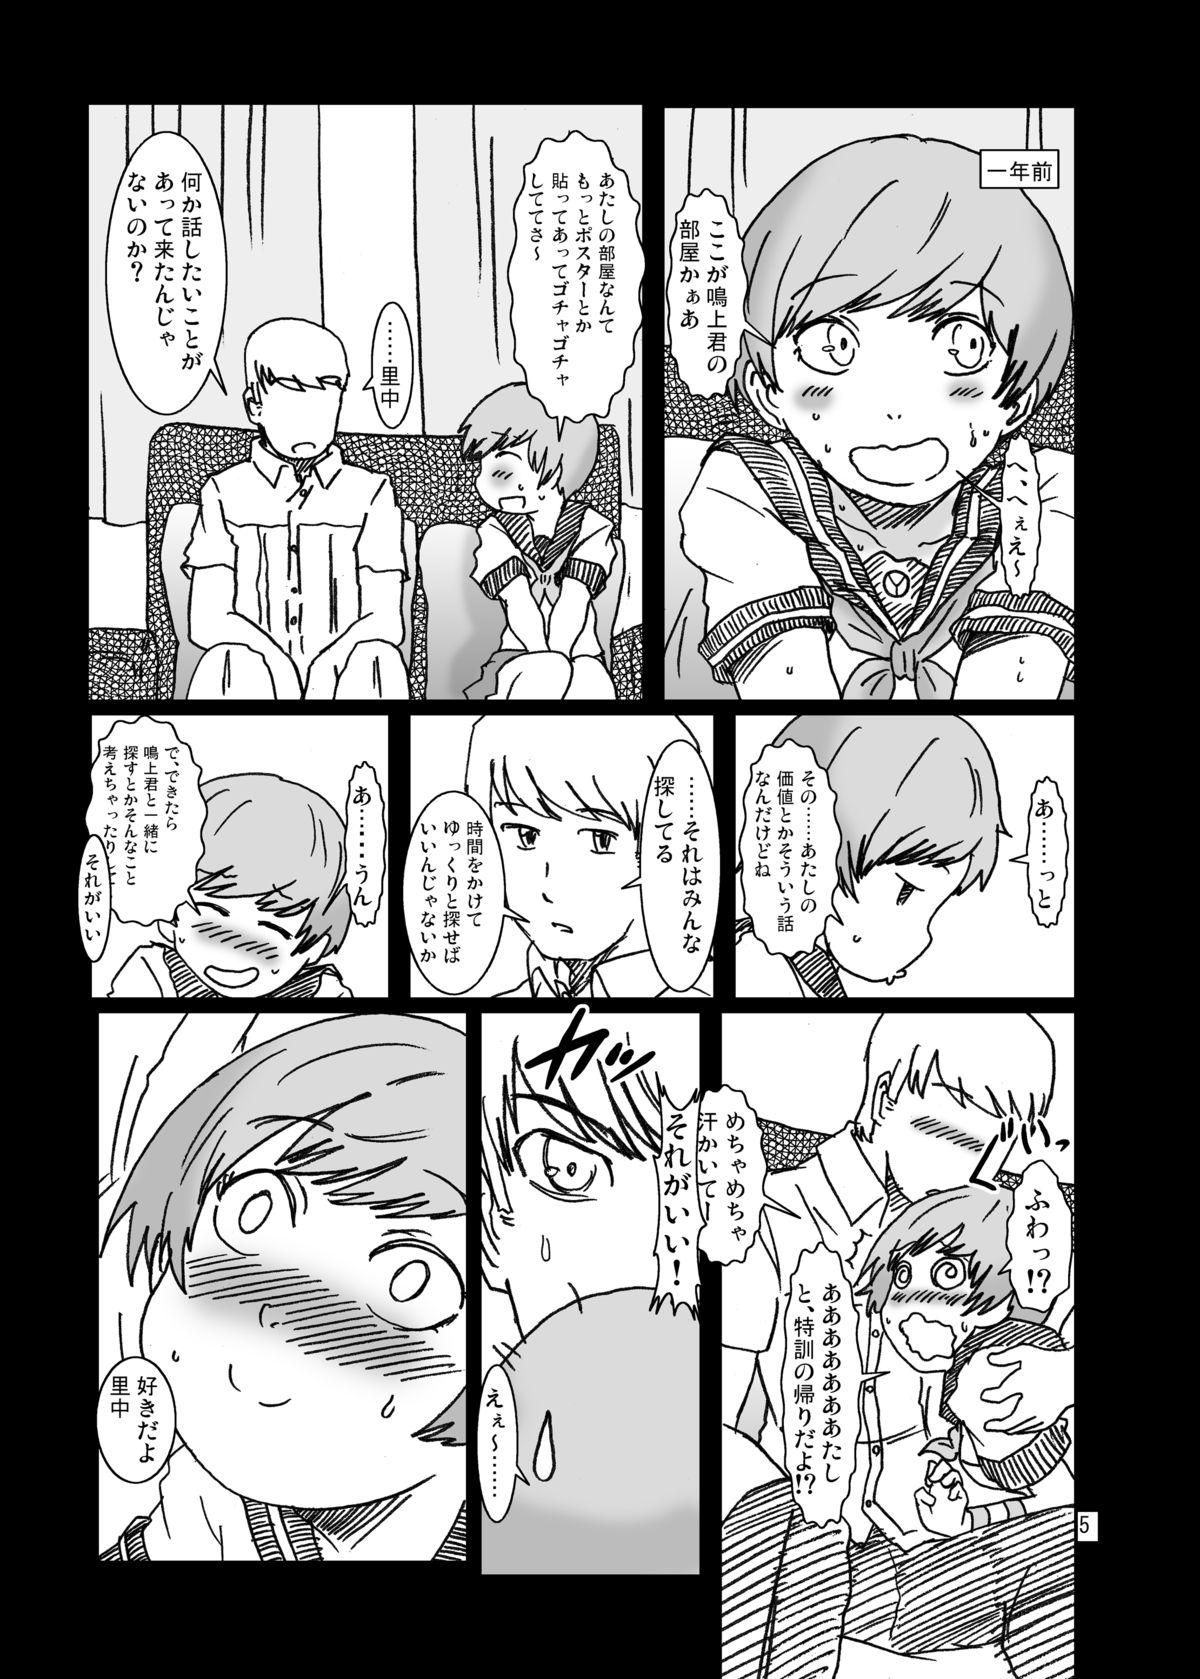 Solo Female Inran Chie-chan Onsen Daisakusen! 4 - Persona 4 Asian Babes - Page 5